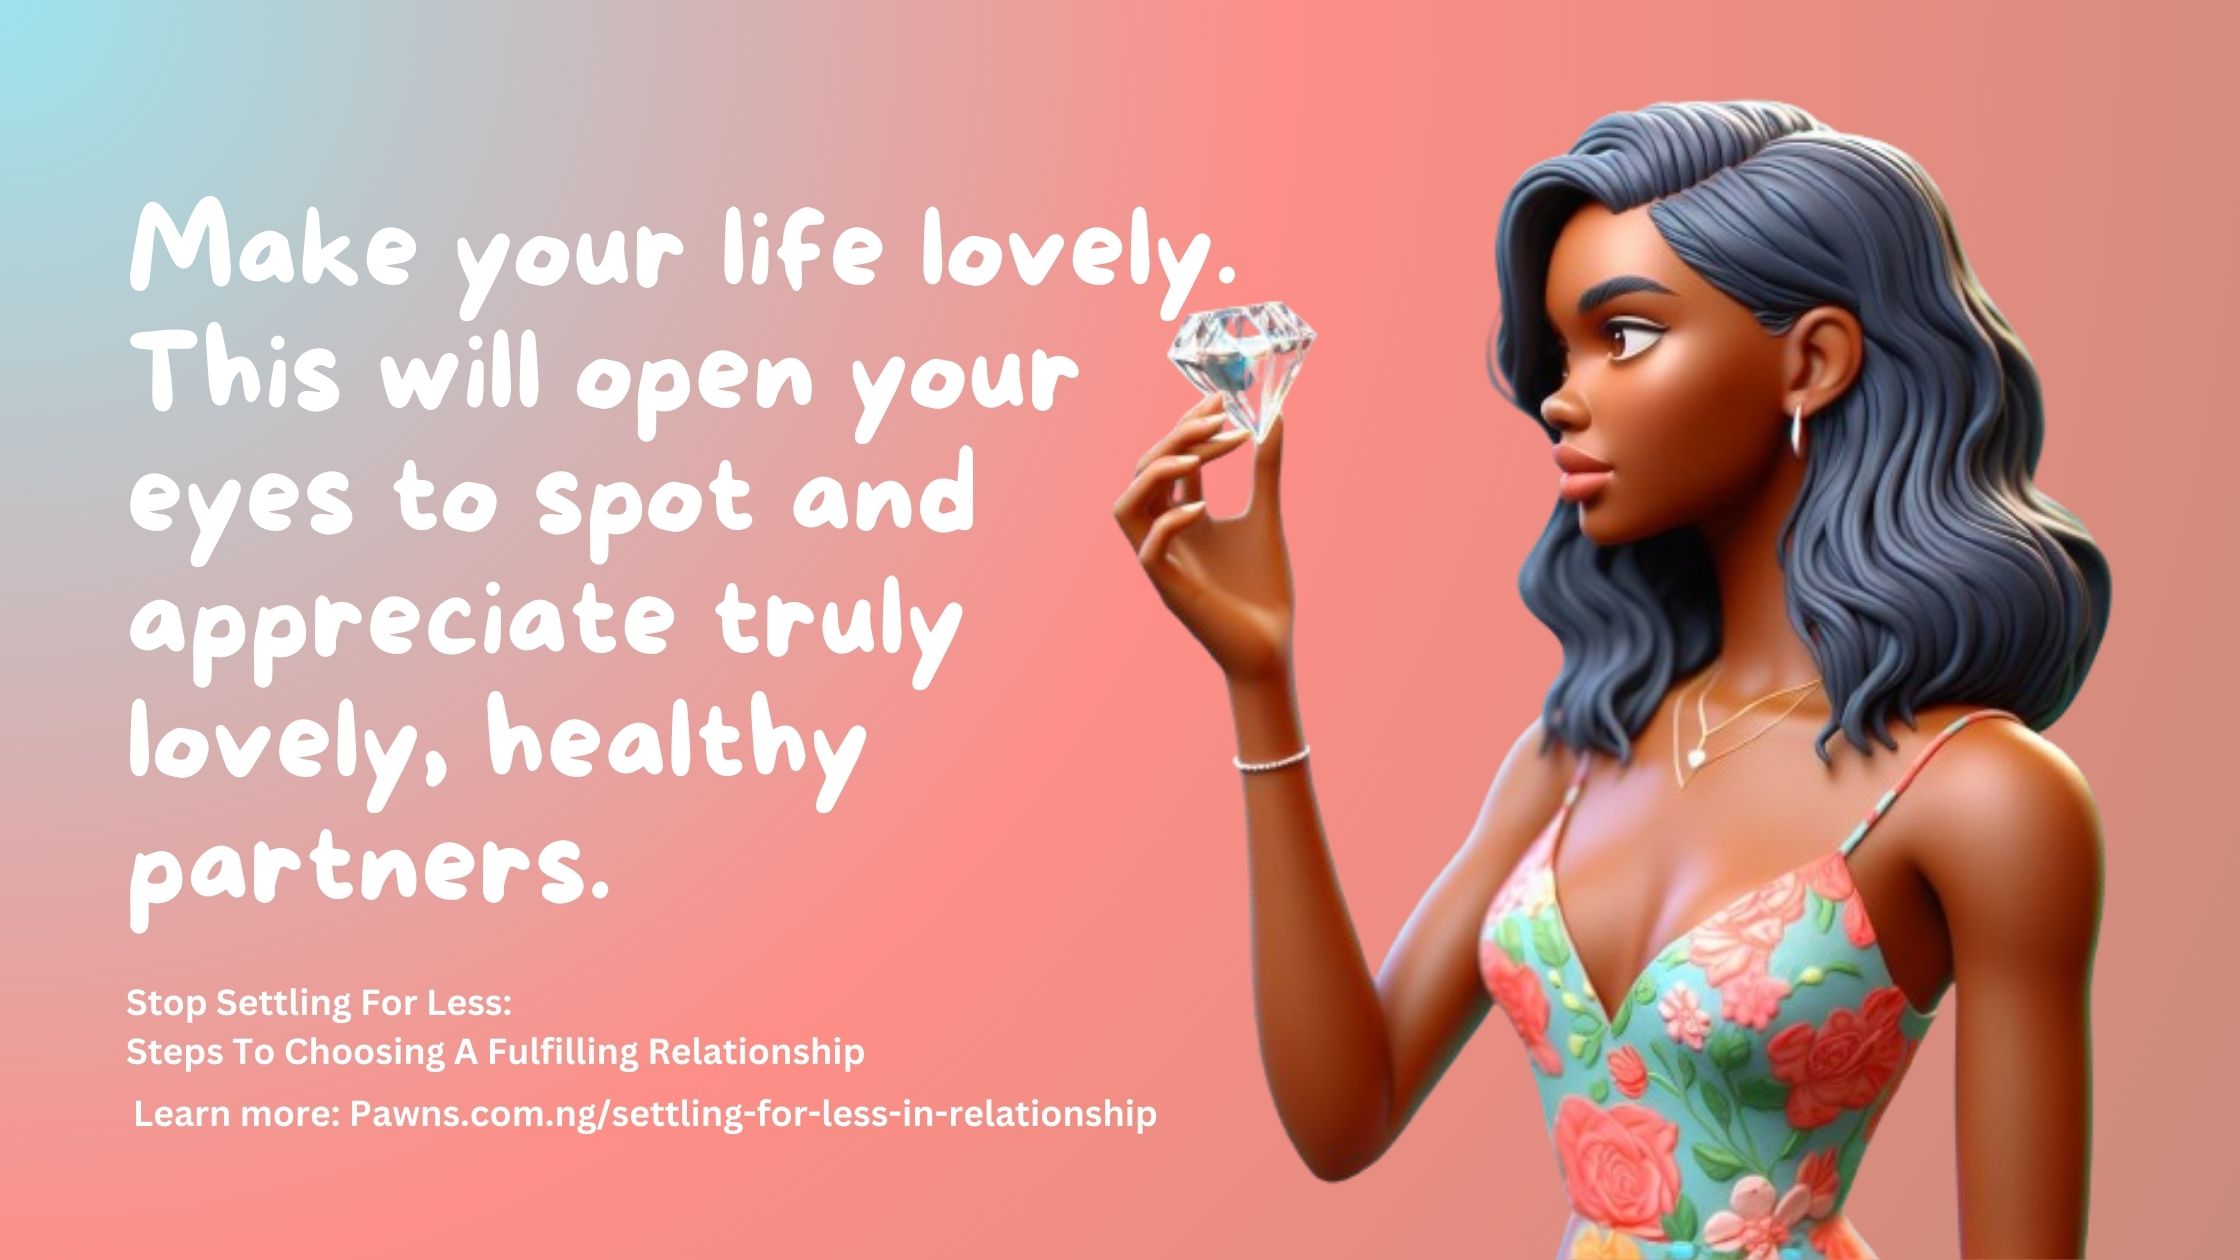 Stop Settling For Less Steps To Choosing A Fulfilling Relationship Make your life lovely. This will open your eyes to spot and appreciate truly lovely, healthy partners